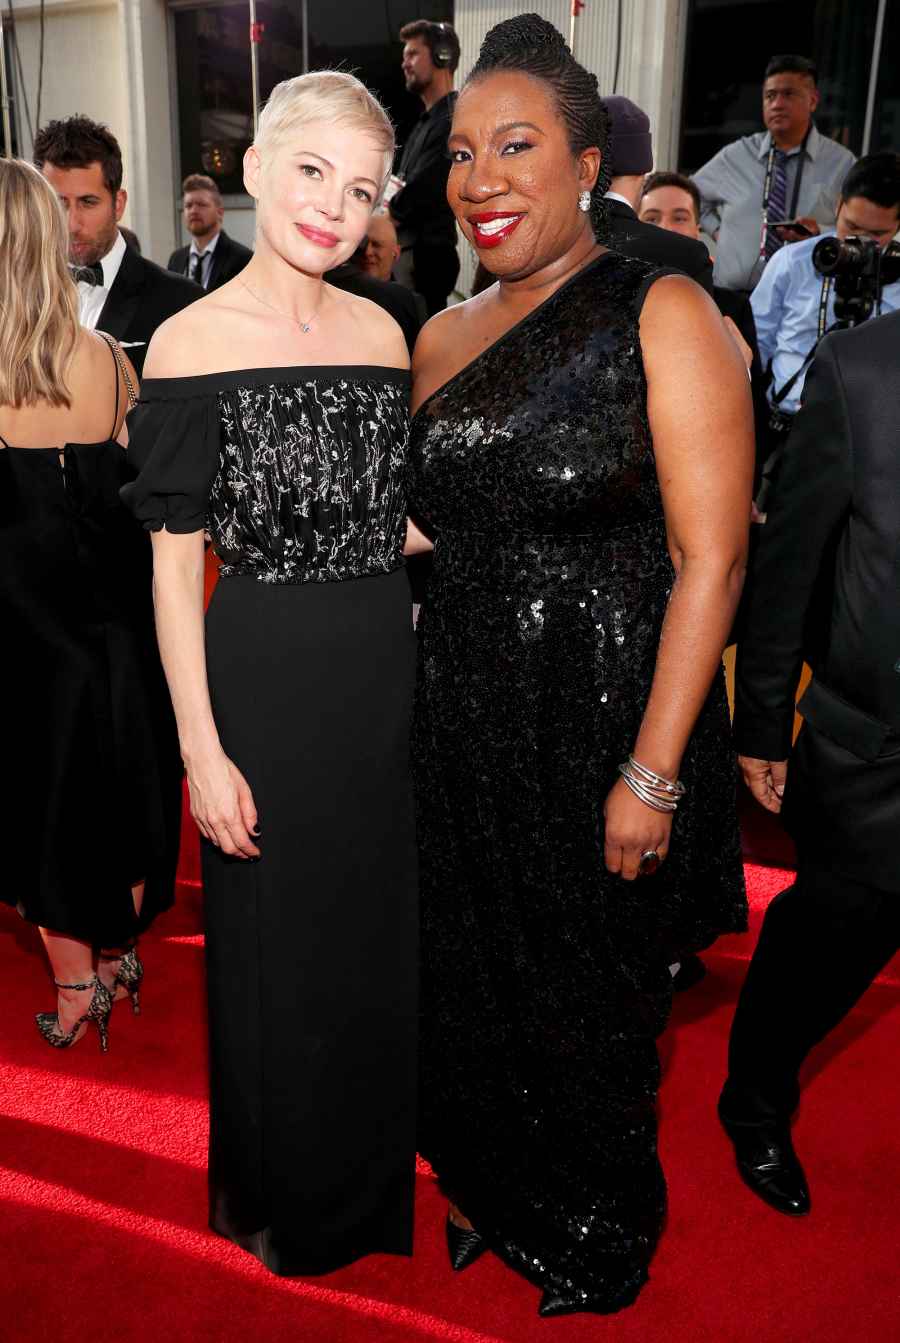 Michelle Williams and activist Tarana Burke arrive to the 75th Annual Golden Globe Awards held at the Beverly Hilton Hotel on January 7, 2018.